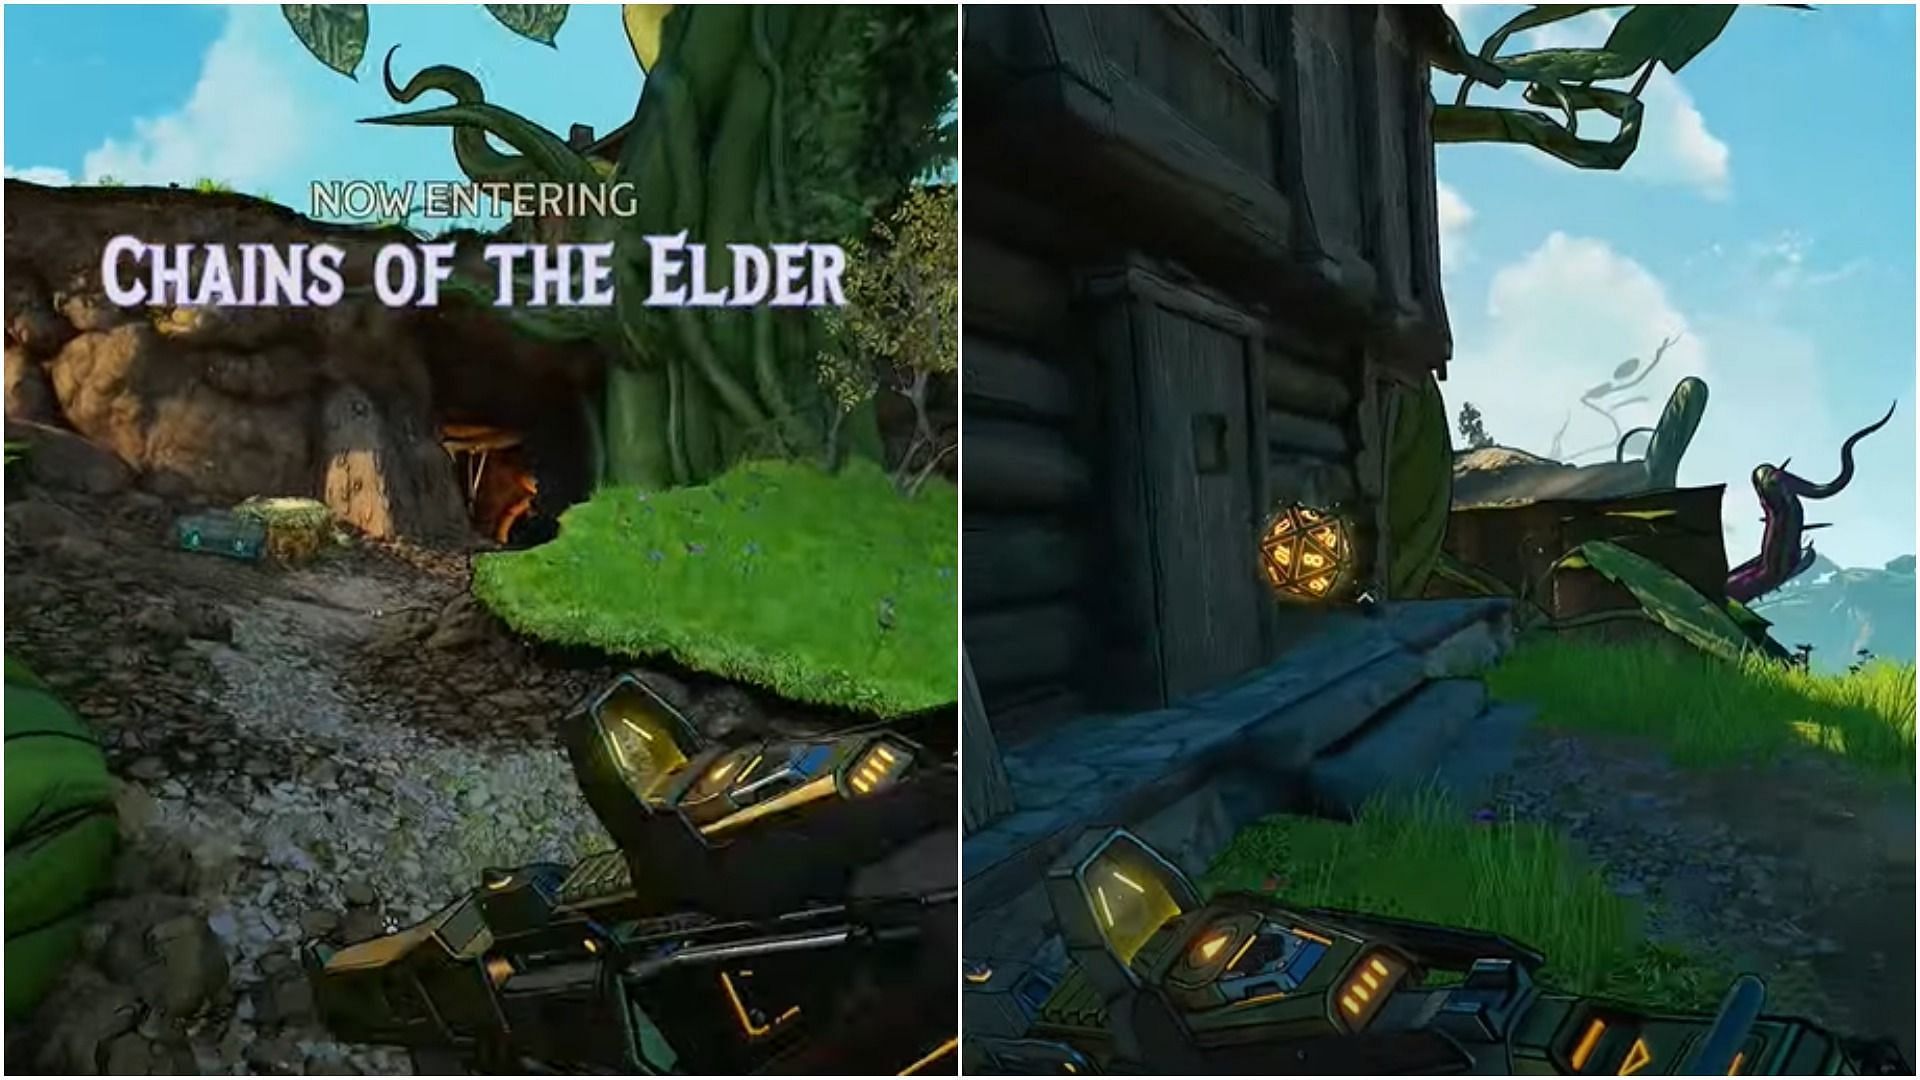 Search for the Lucky Dice on the doorstep of a home (Image via WoW Quests/YouTube)